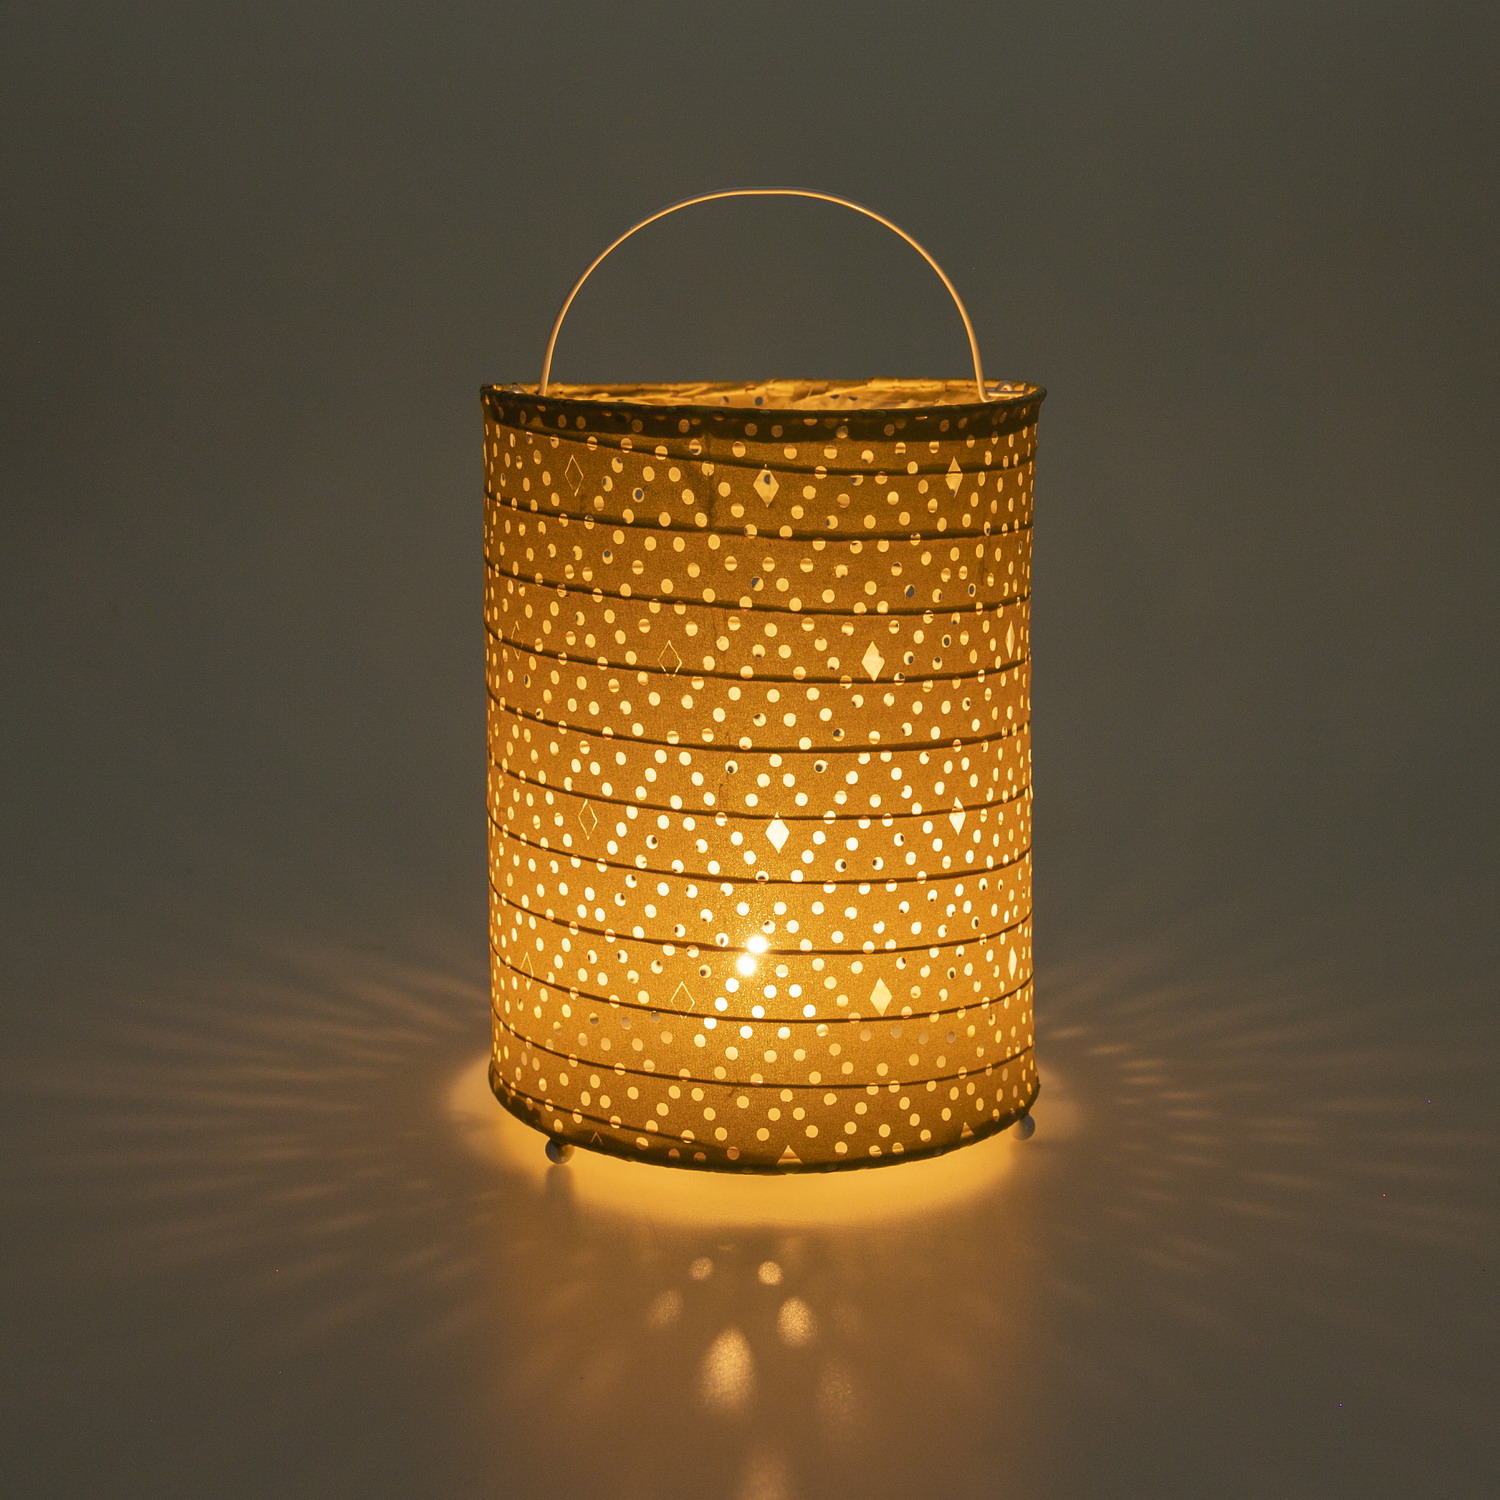 Wholesale LED Tealight Lanterns for Indoor and Outdoor Decoration | ZHONGXIN Featured Image